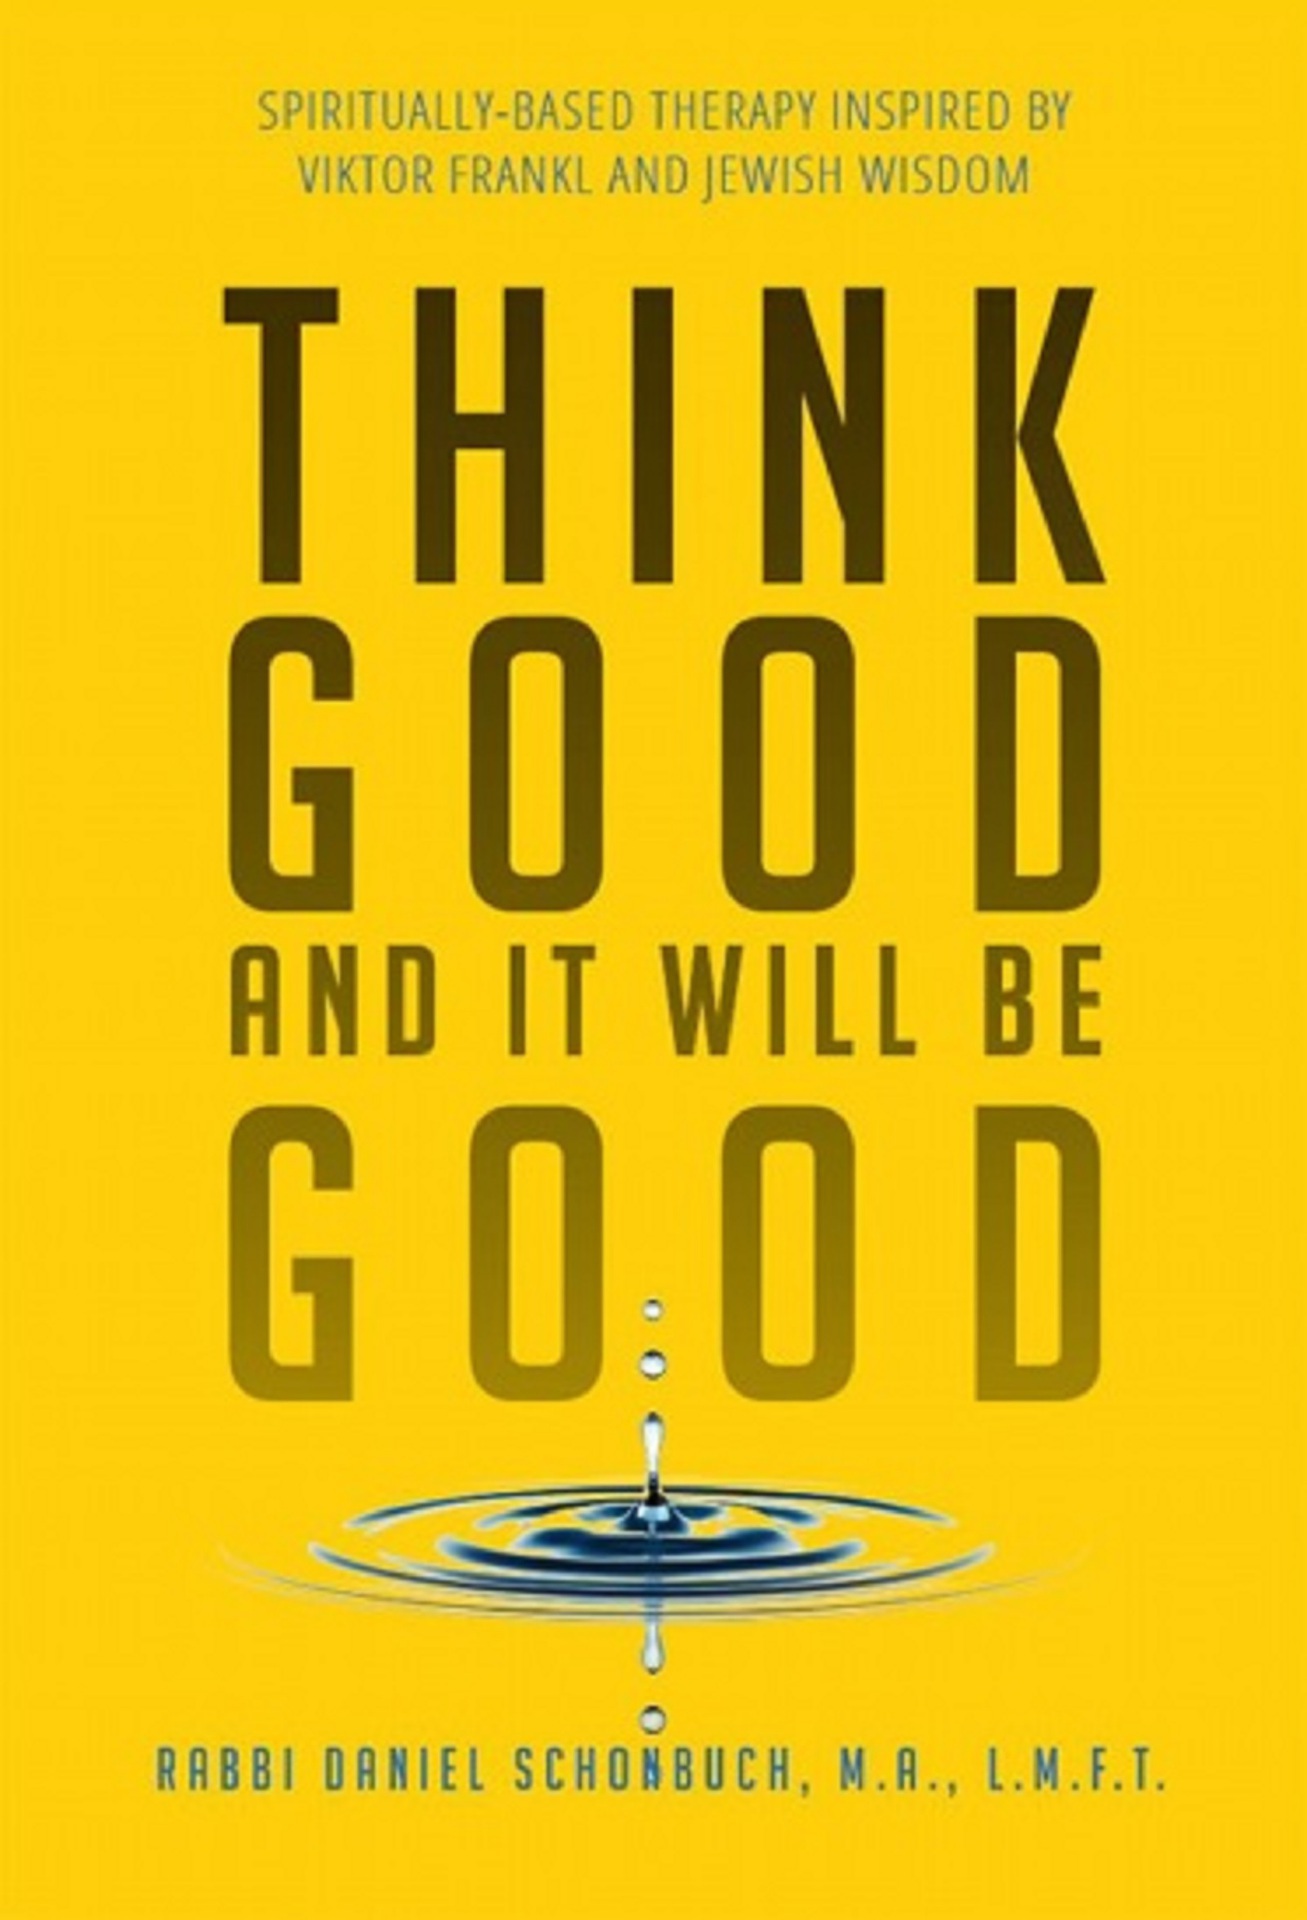 THINK GOOD AND IT WILL BE GOOD Copyright 2017 by Rabbi Daniel Schonbuch - photo 1